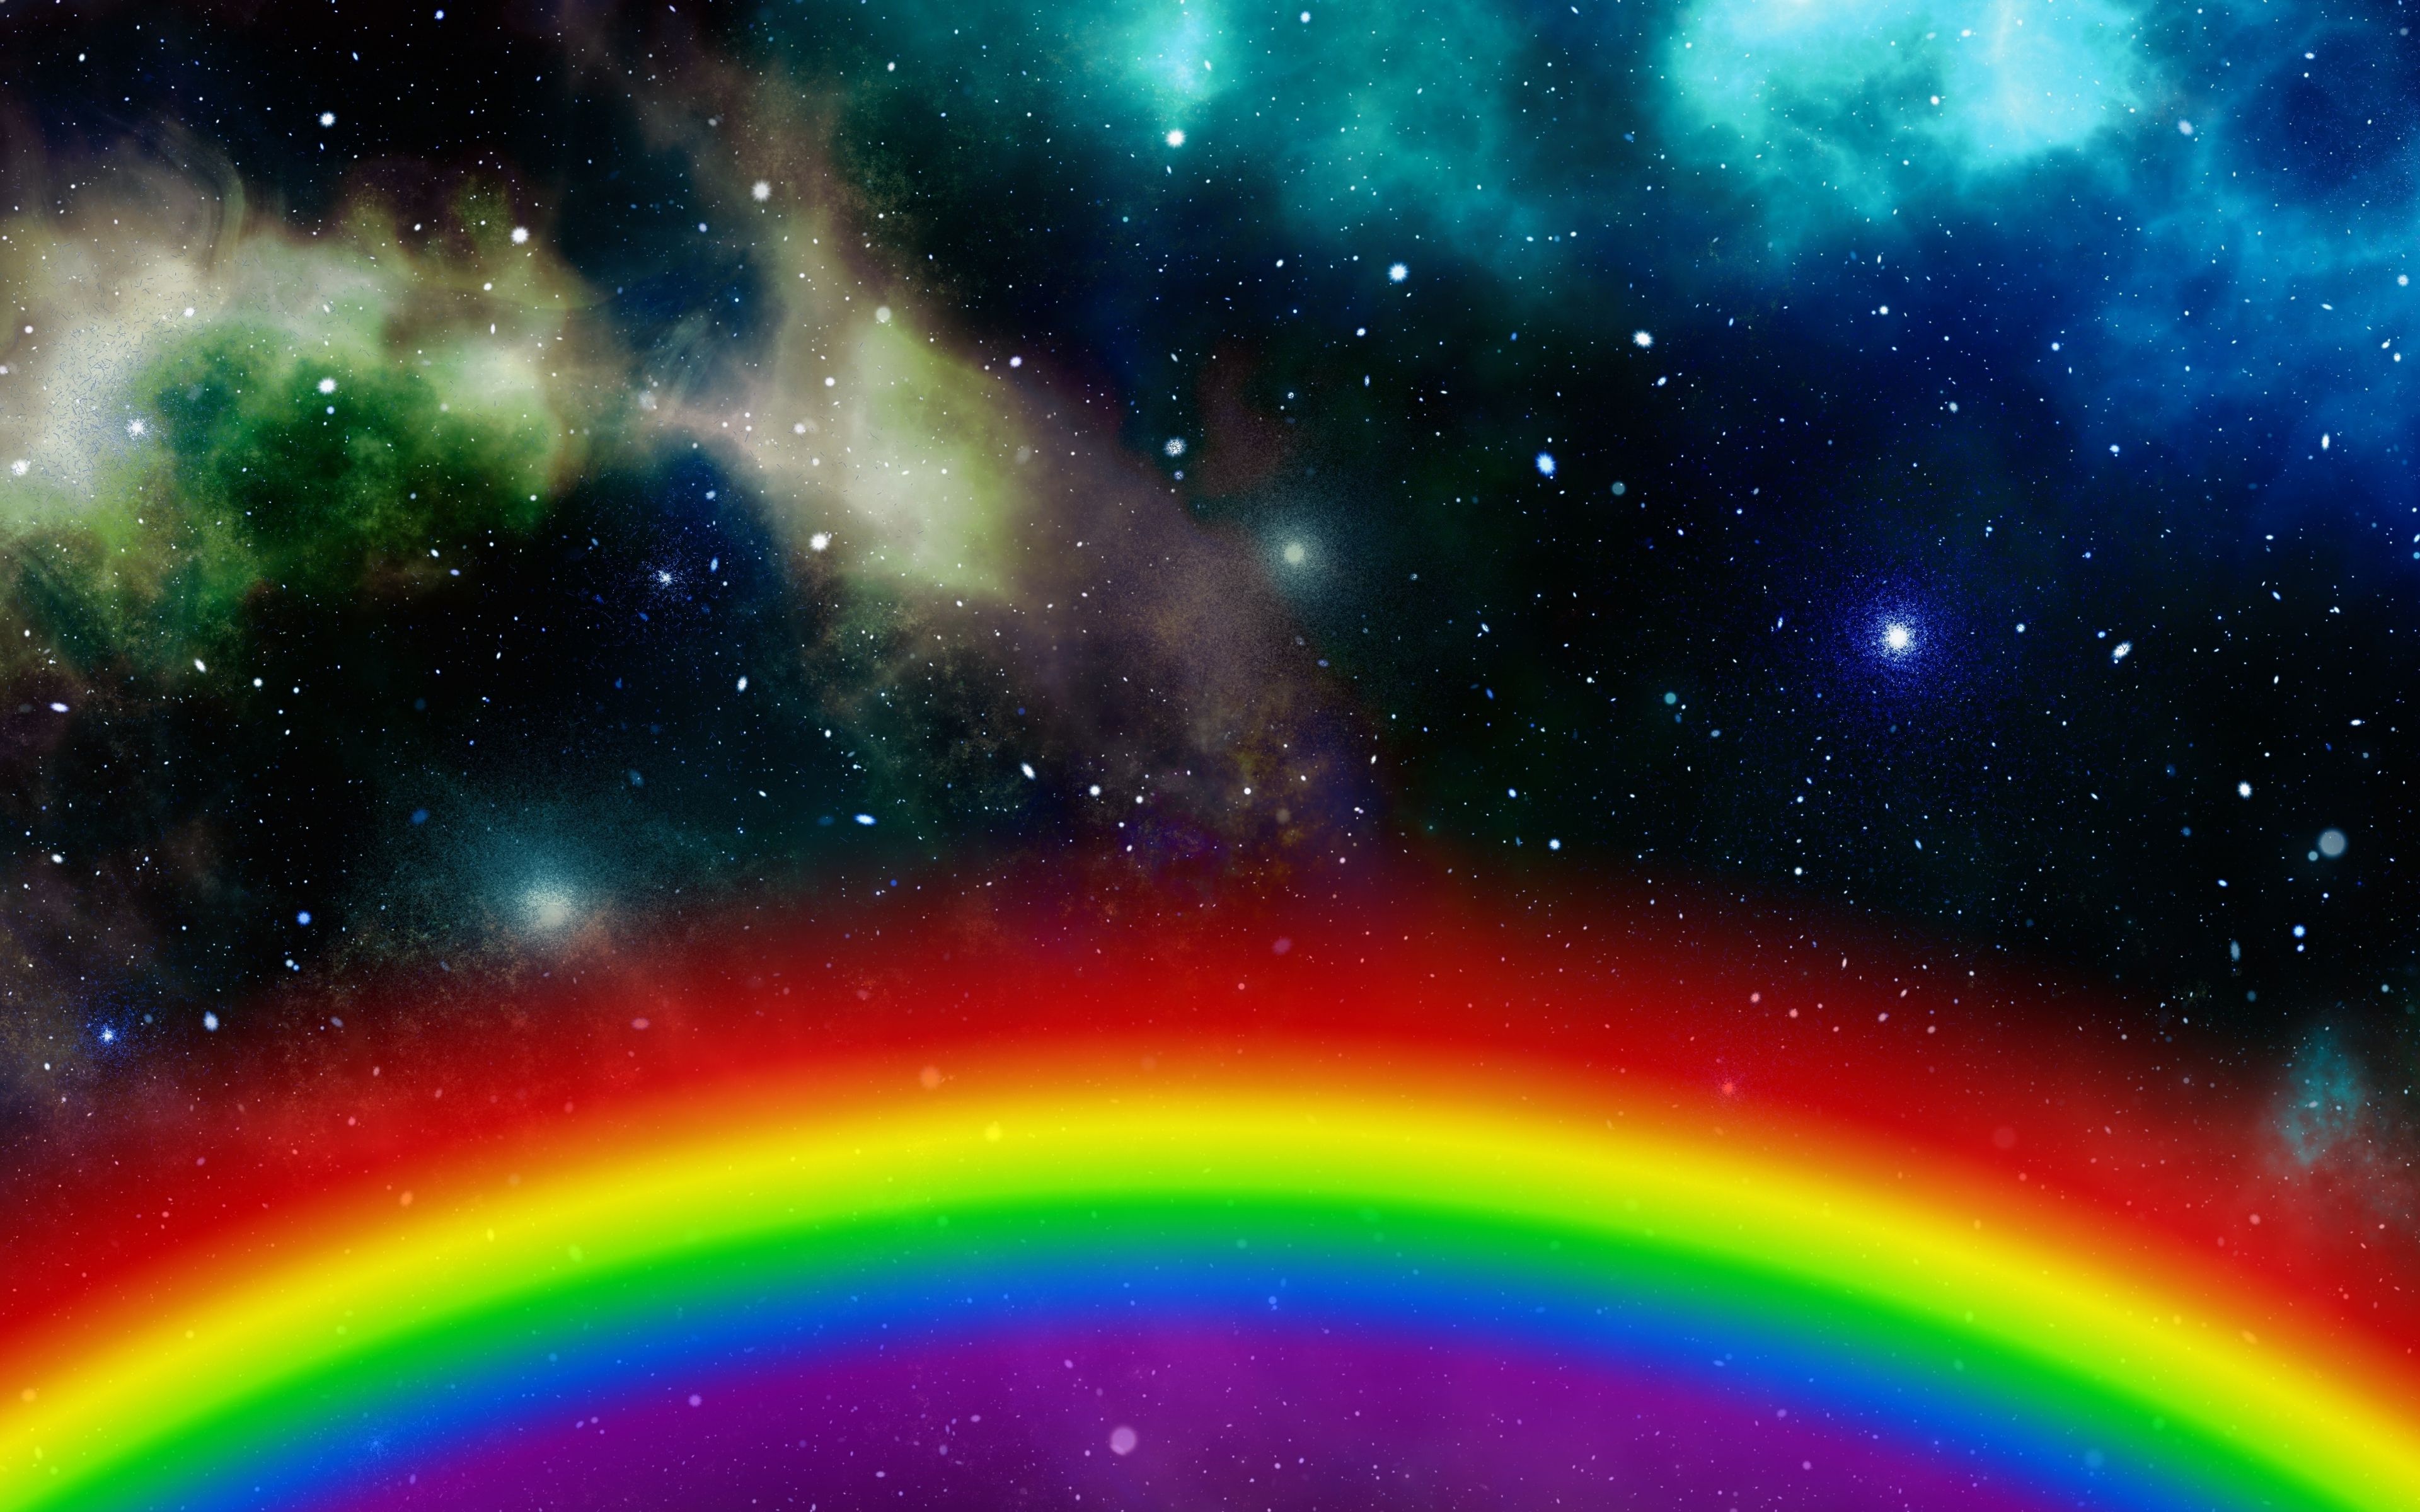 Download 3840x2400 wallpaper rainbow, colorful, space, clouds, art, 4k, ultra HD 16: widescreen, 3840x2400 HD image, background, 21233